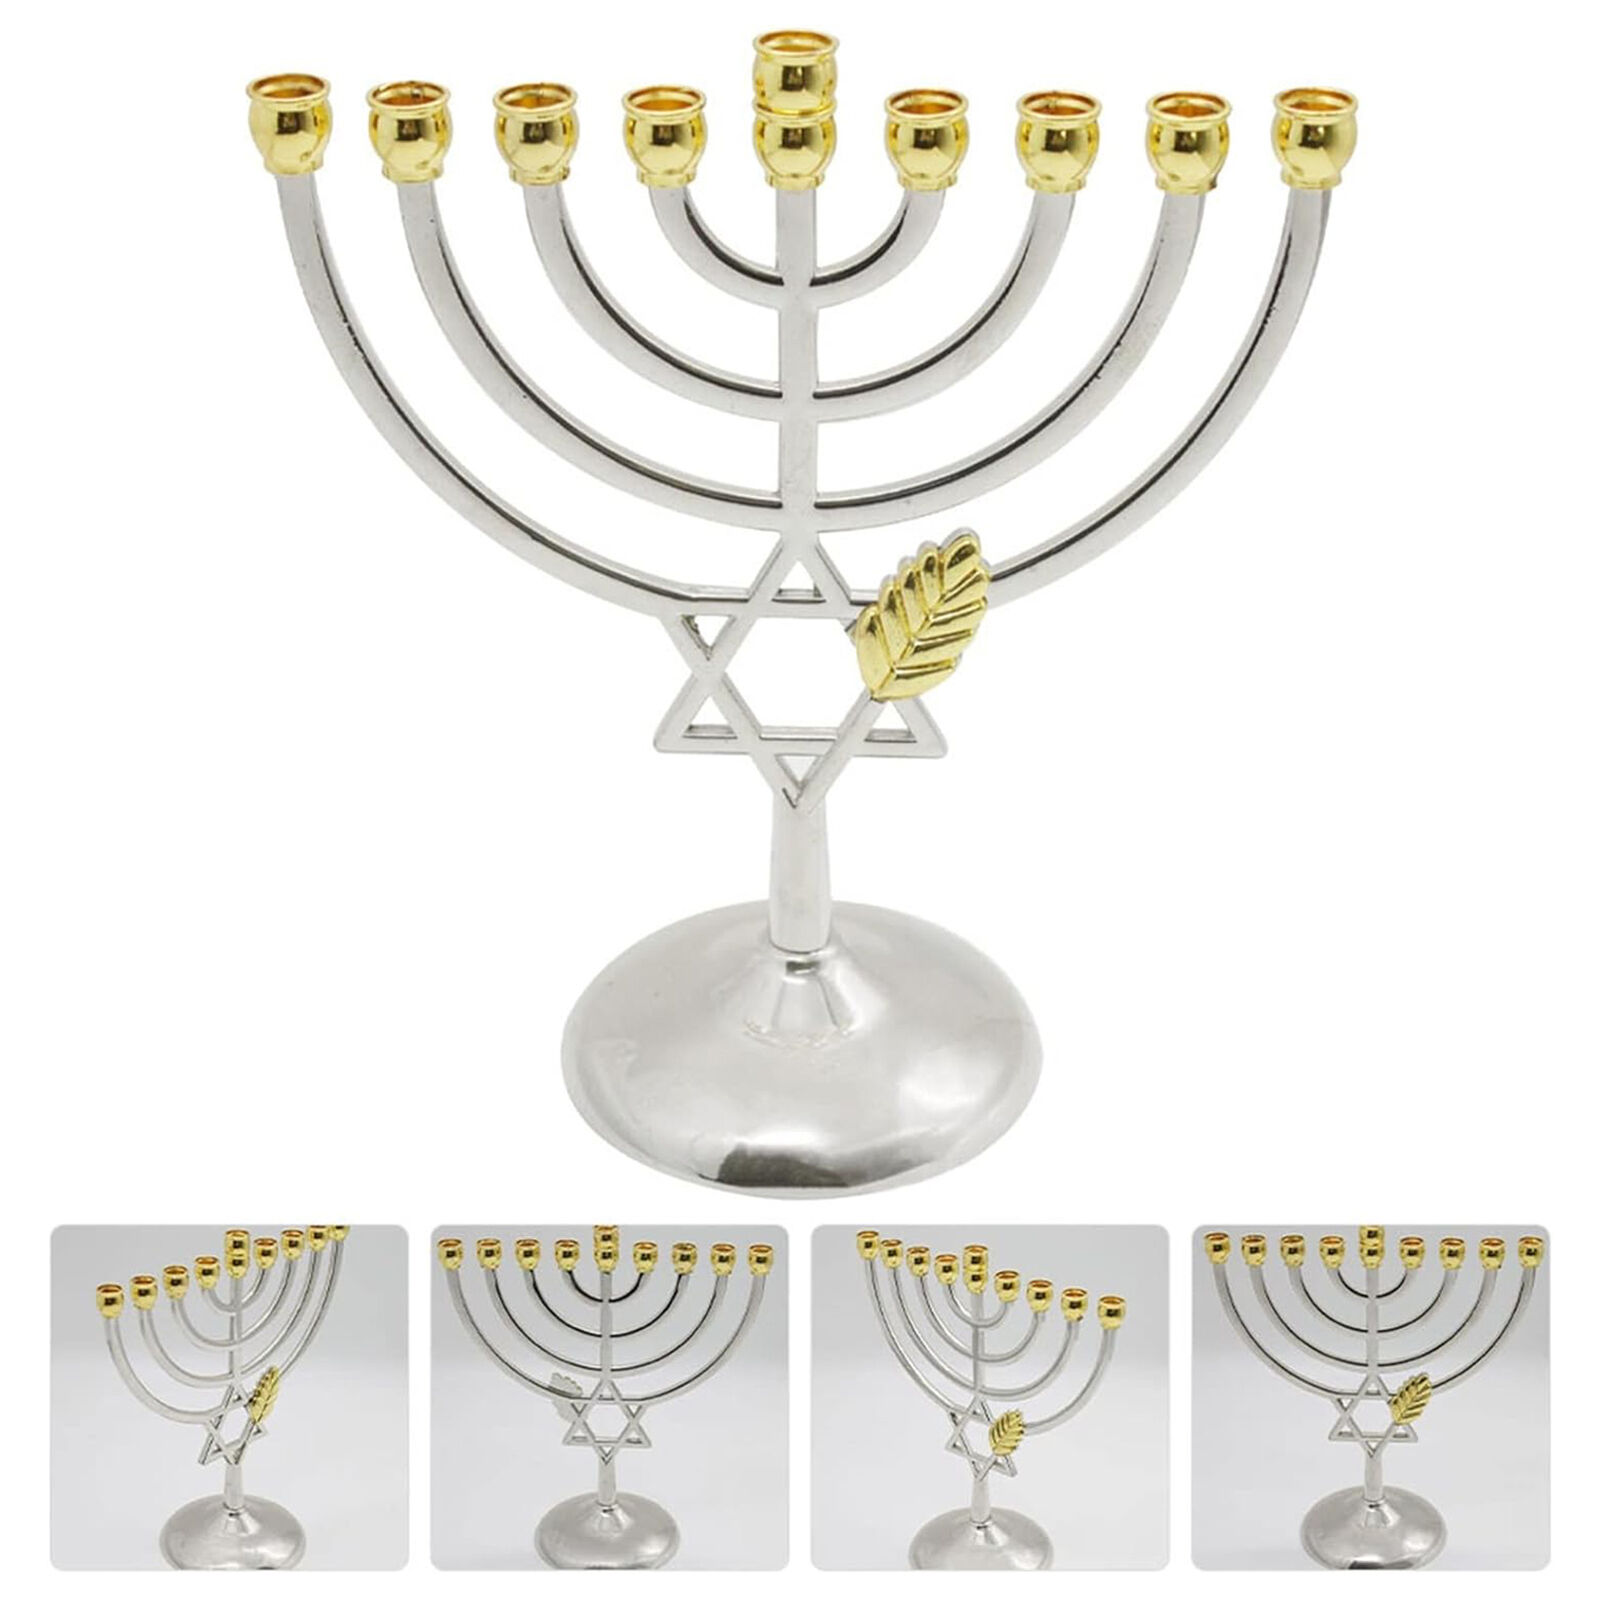  Hanukkah Candle Holder 7.1x6.3x3.2 Inch 9 Branch Candle Holder Candle Holder Ca